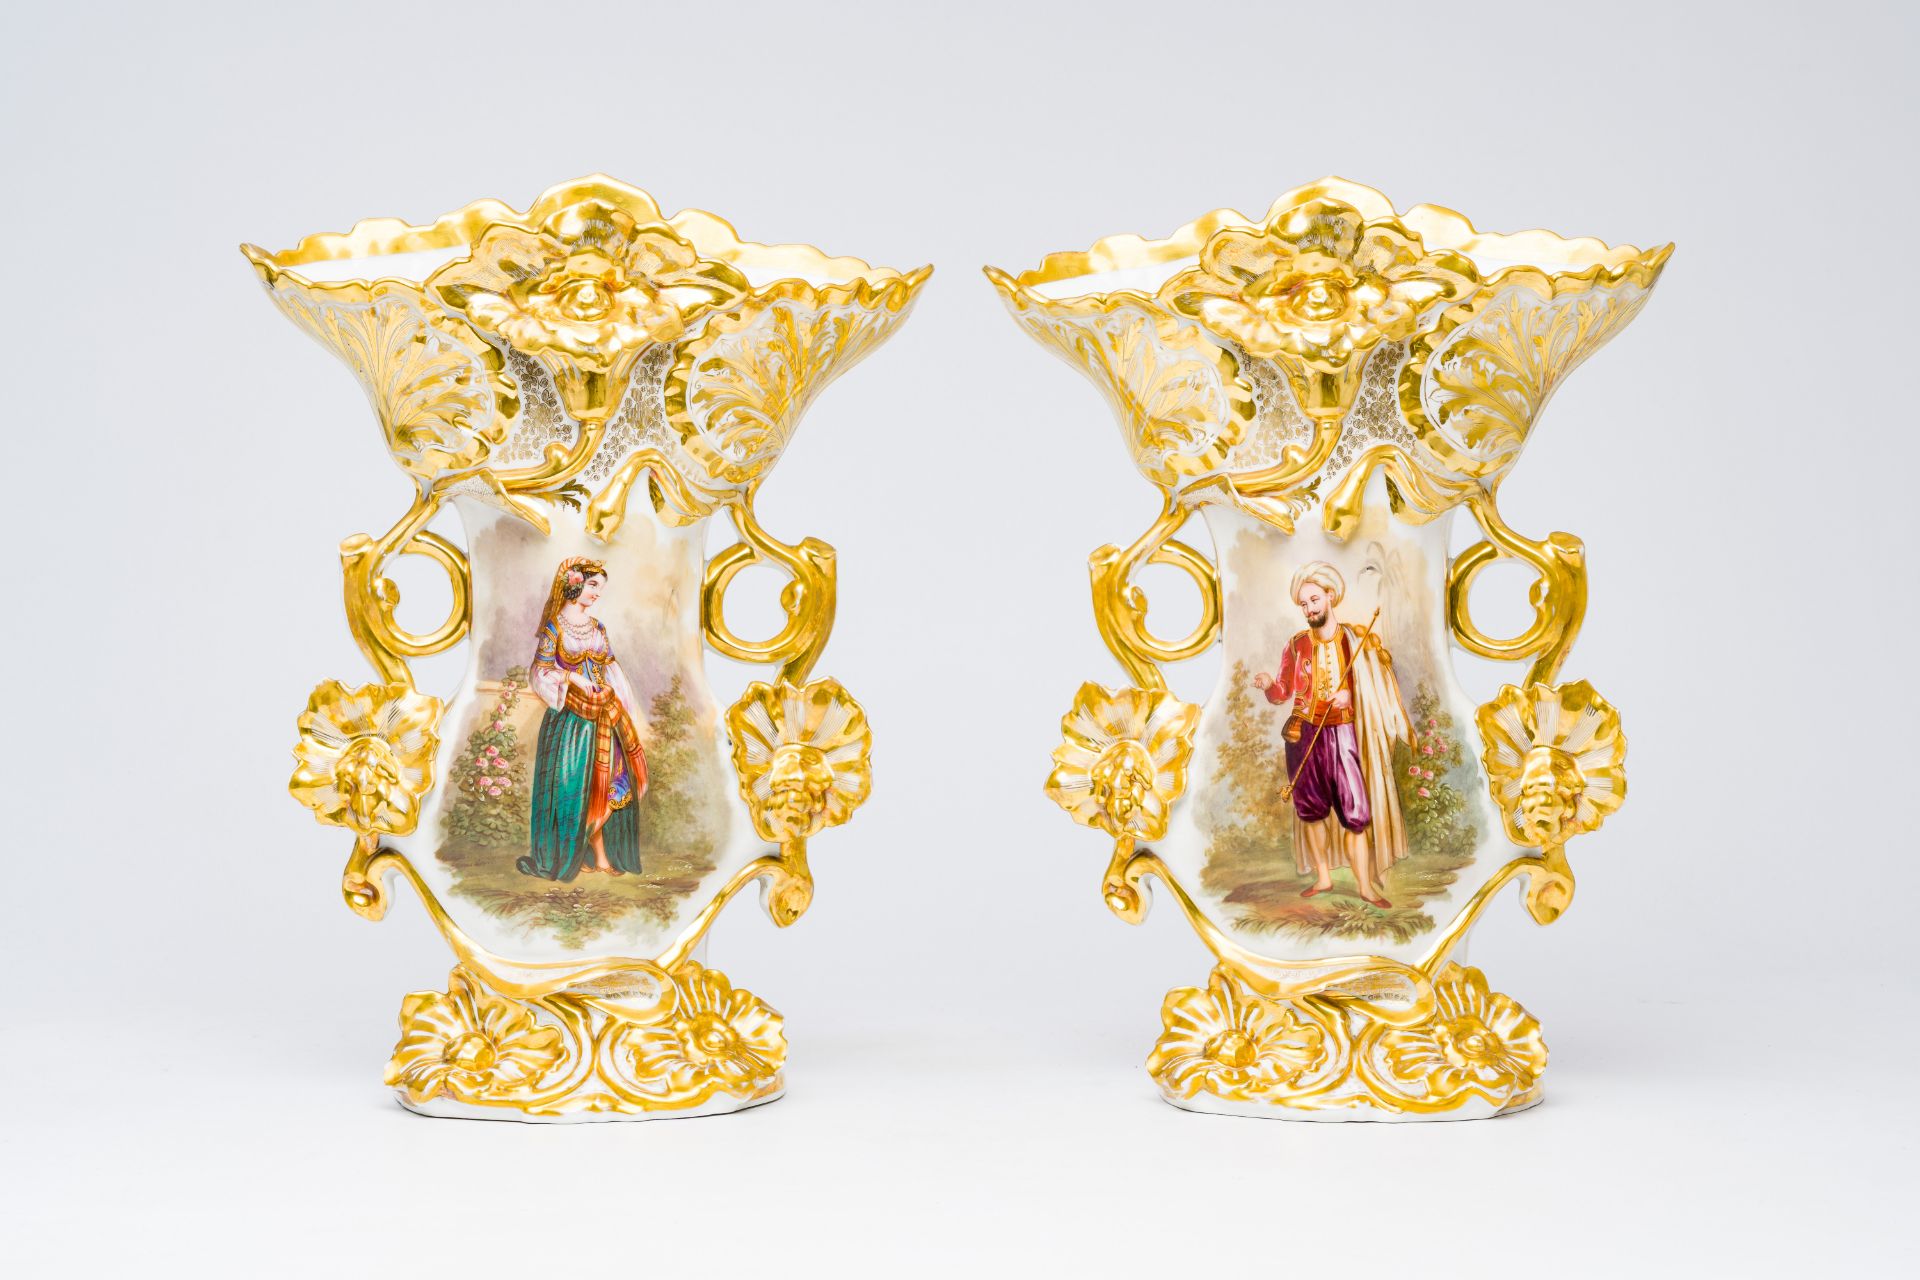 A pair of French gilt and polychrome old Paris porcelain vases with an Indian couple and floral reli - Image 2 of 7